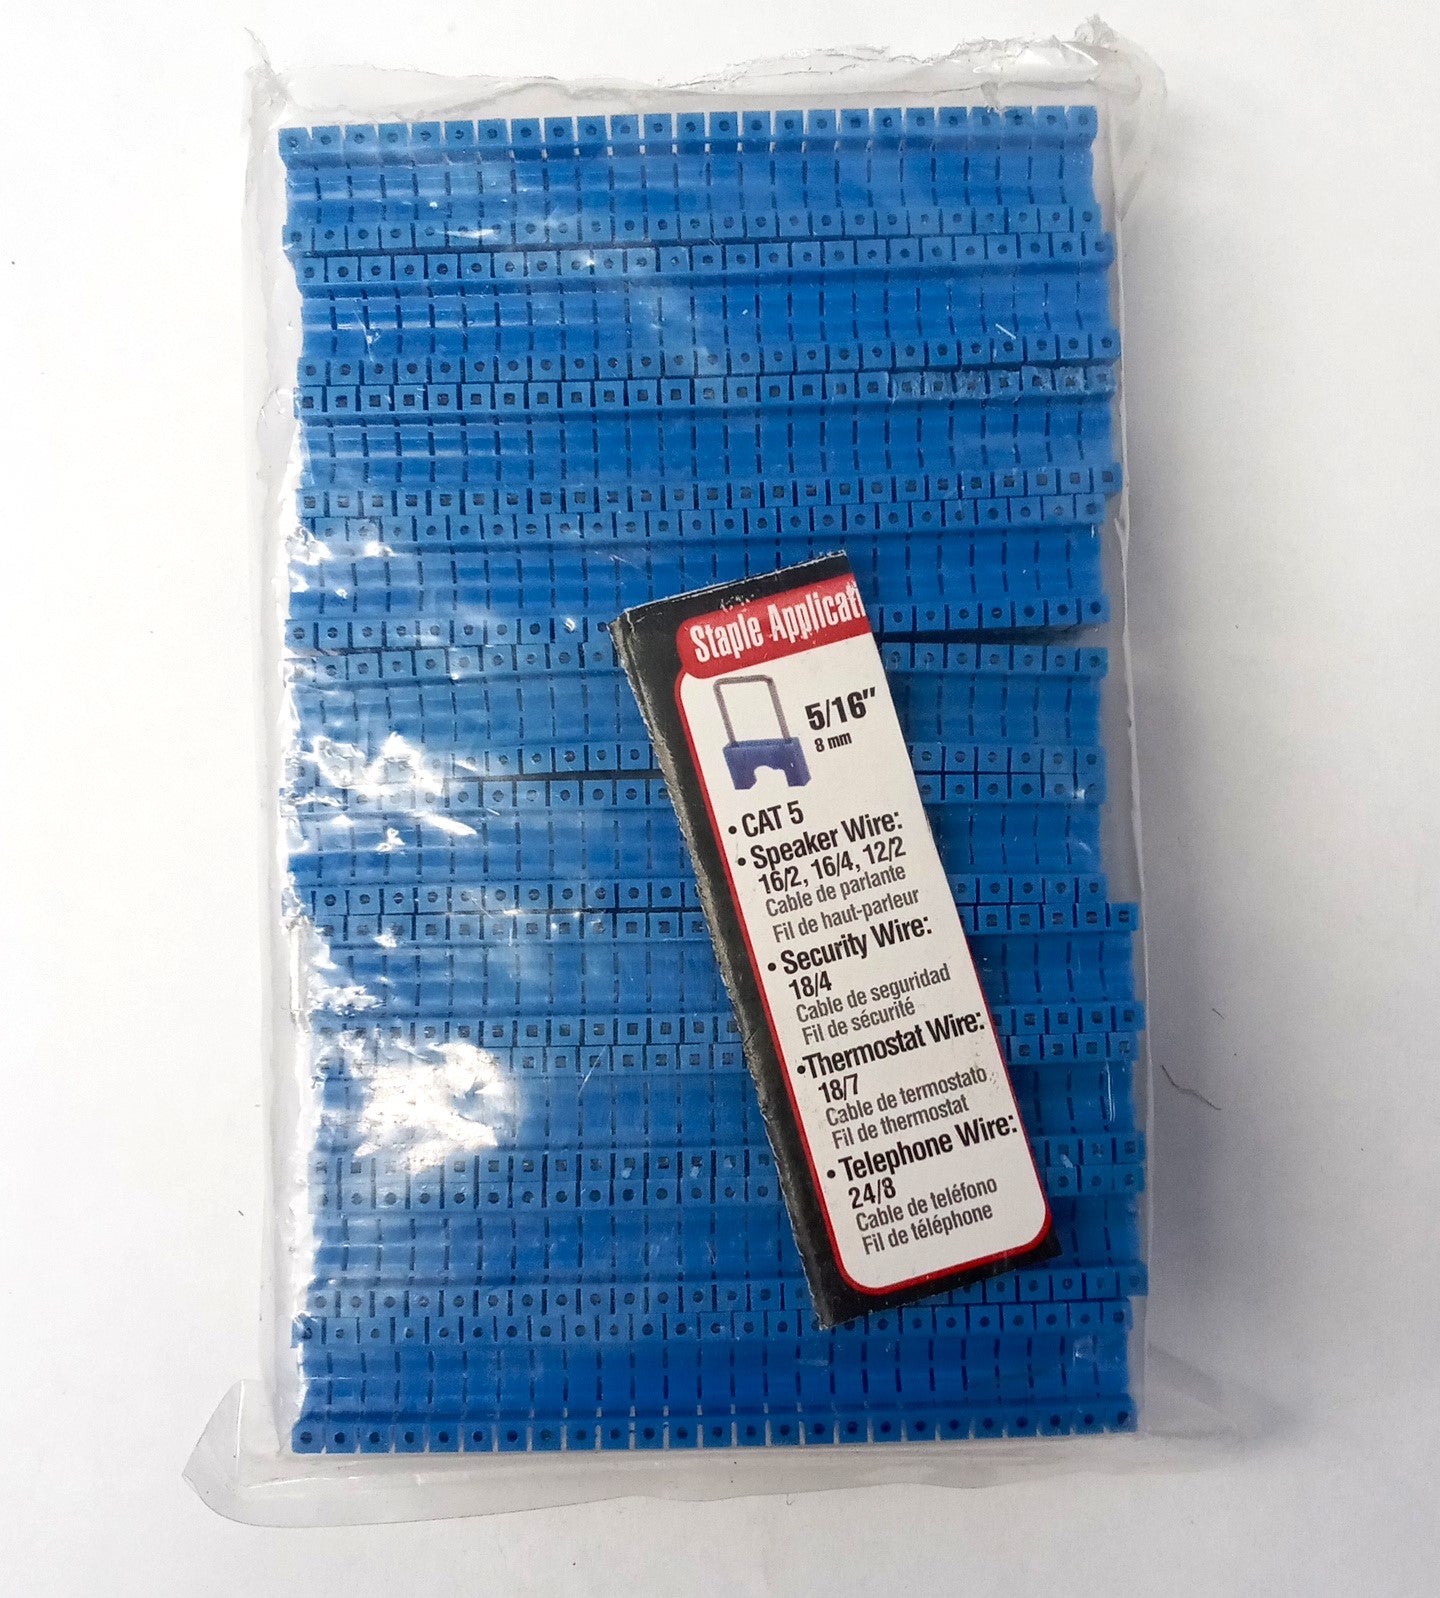 Gardner Bender Cable Boss MPS-2080 5/16" Insulated Blue Staples 250 Pack